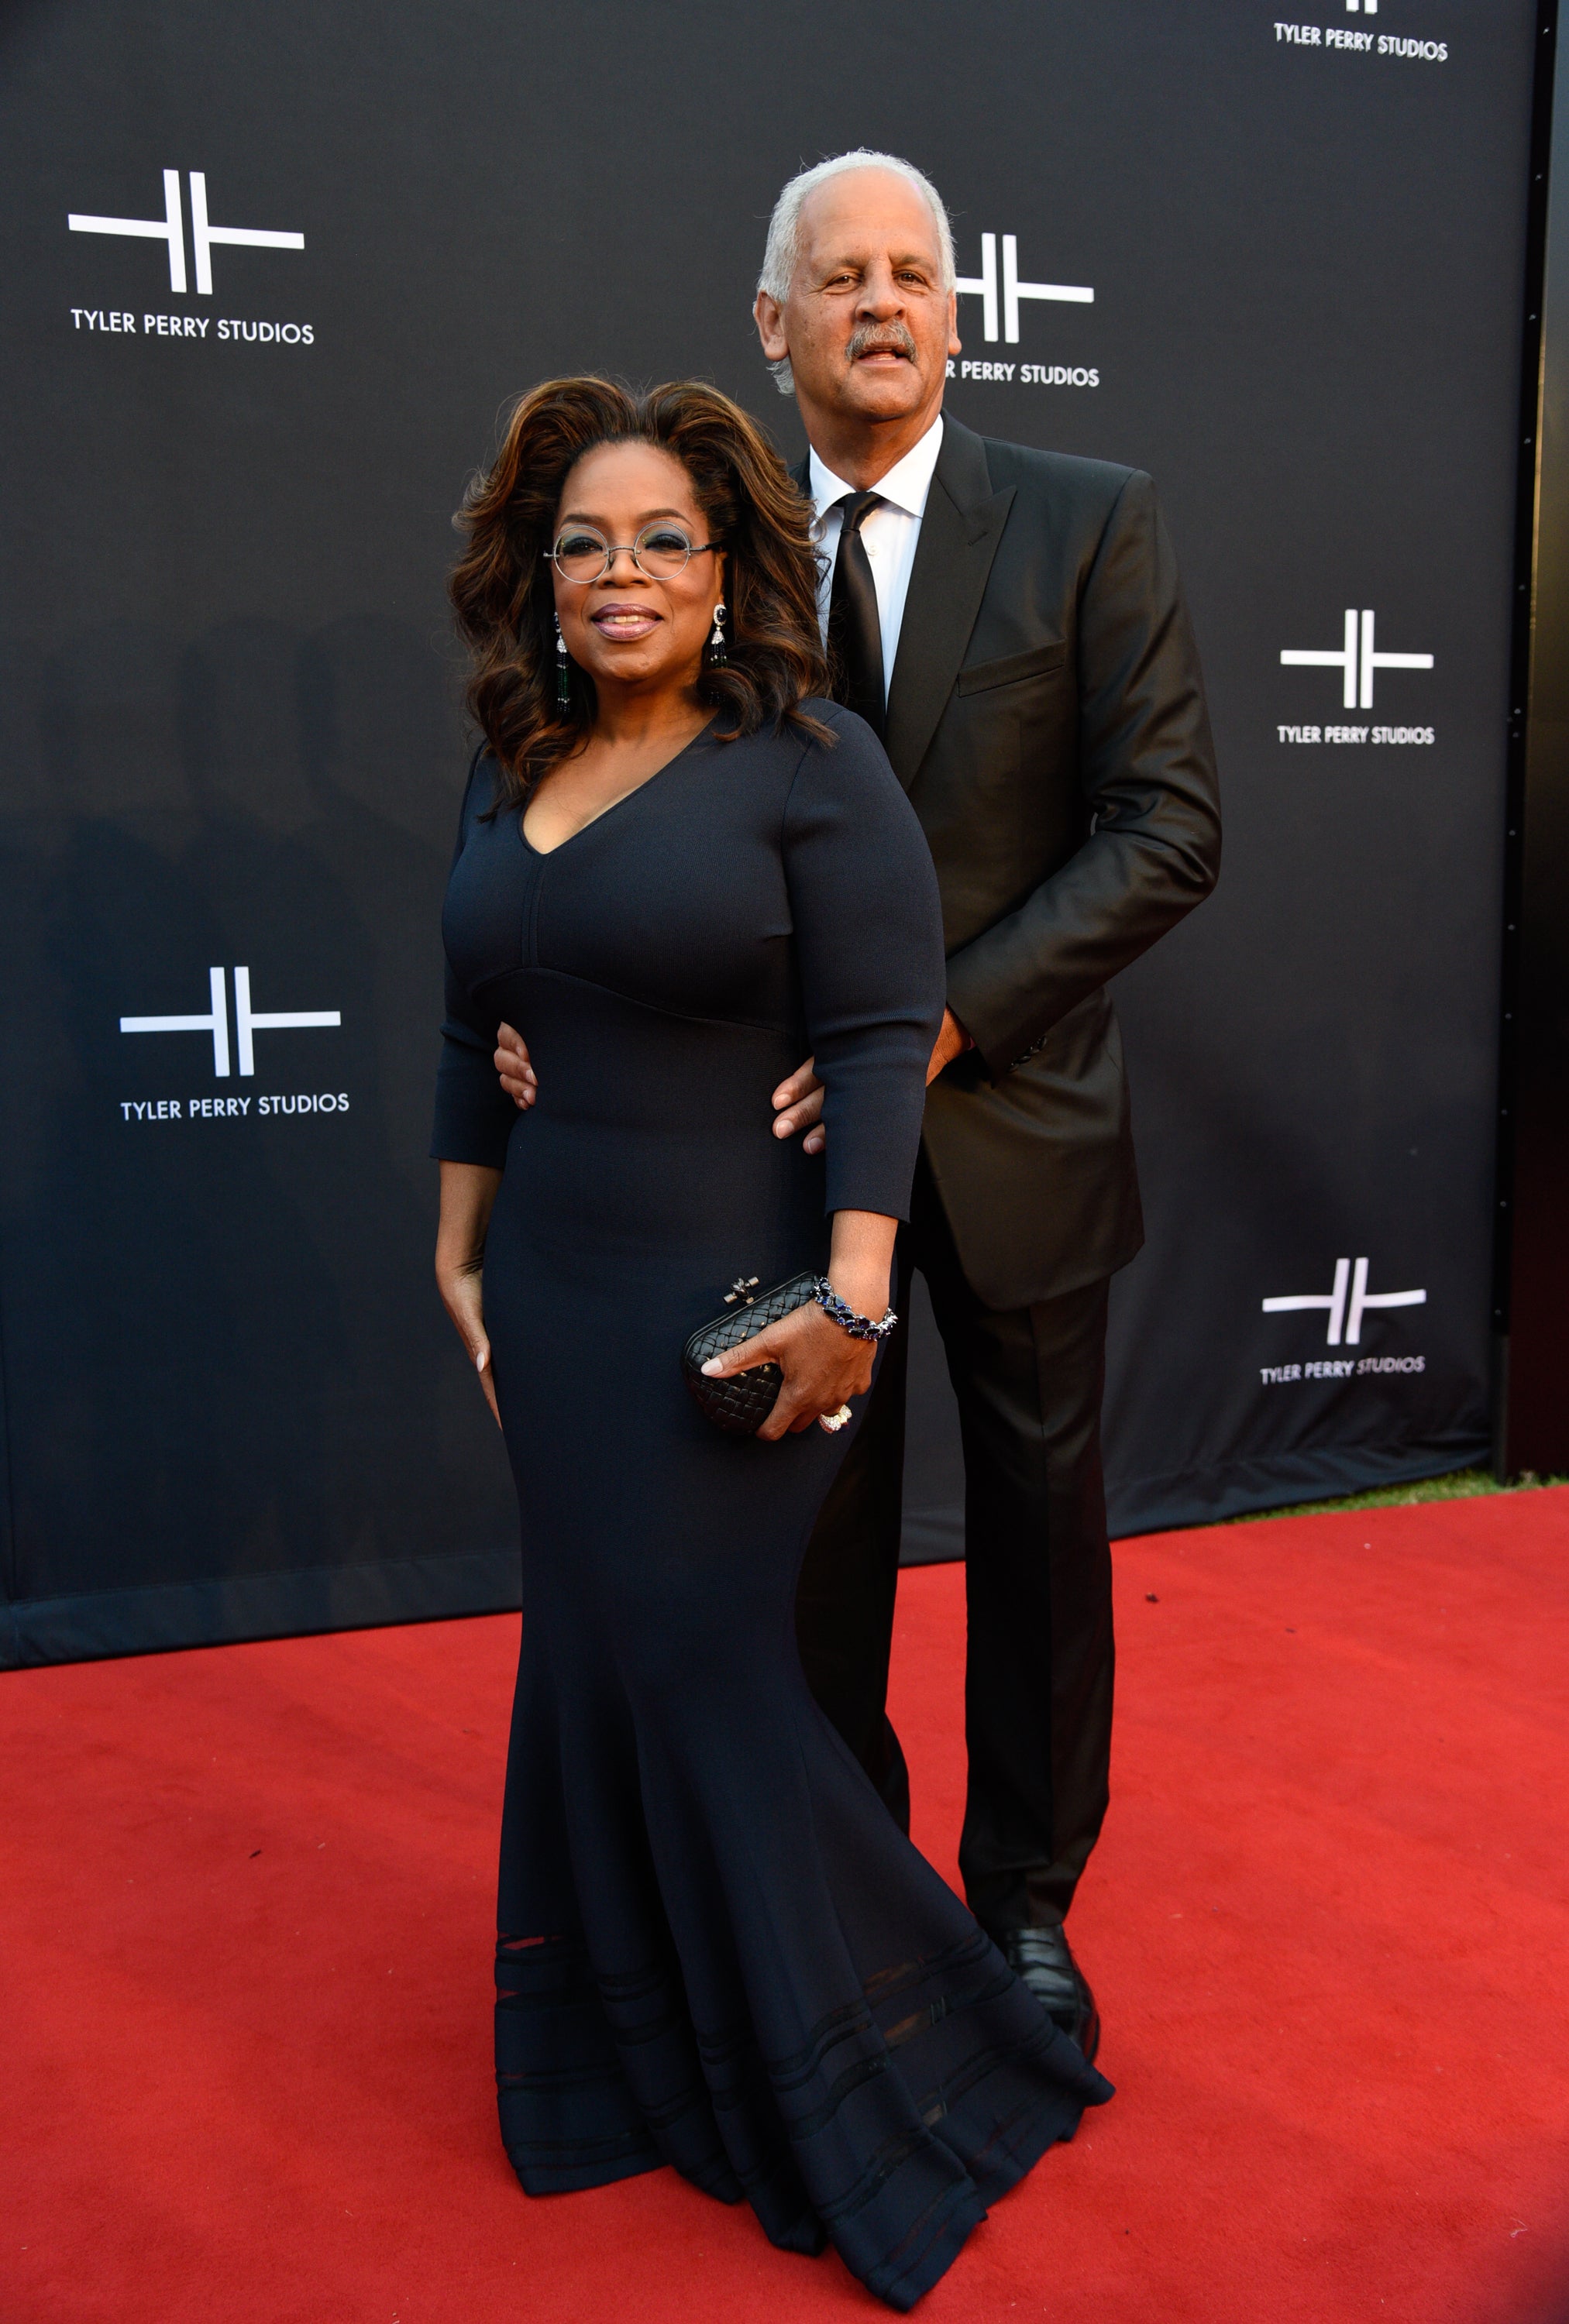 Hollywood’s Hottest Couples Showed Up and Showed Out For Tyler Perry's Grand Opening